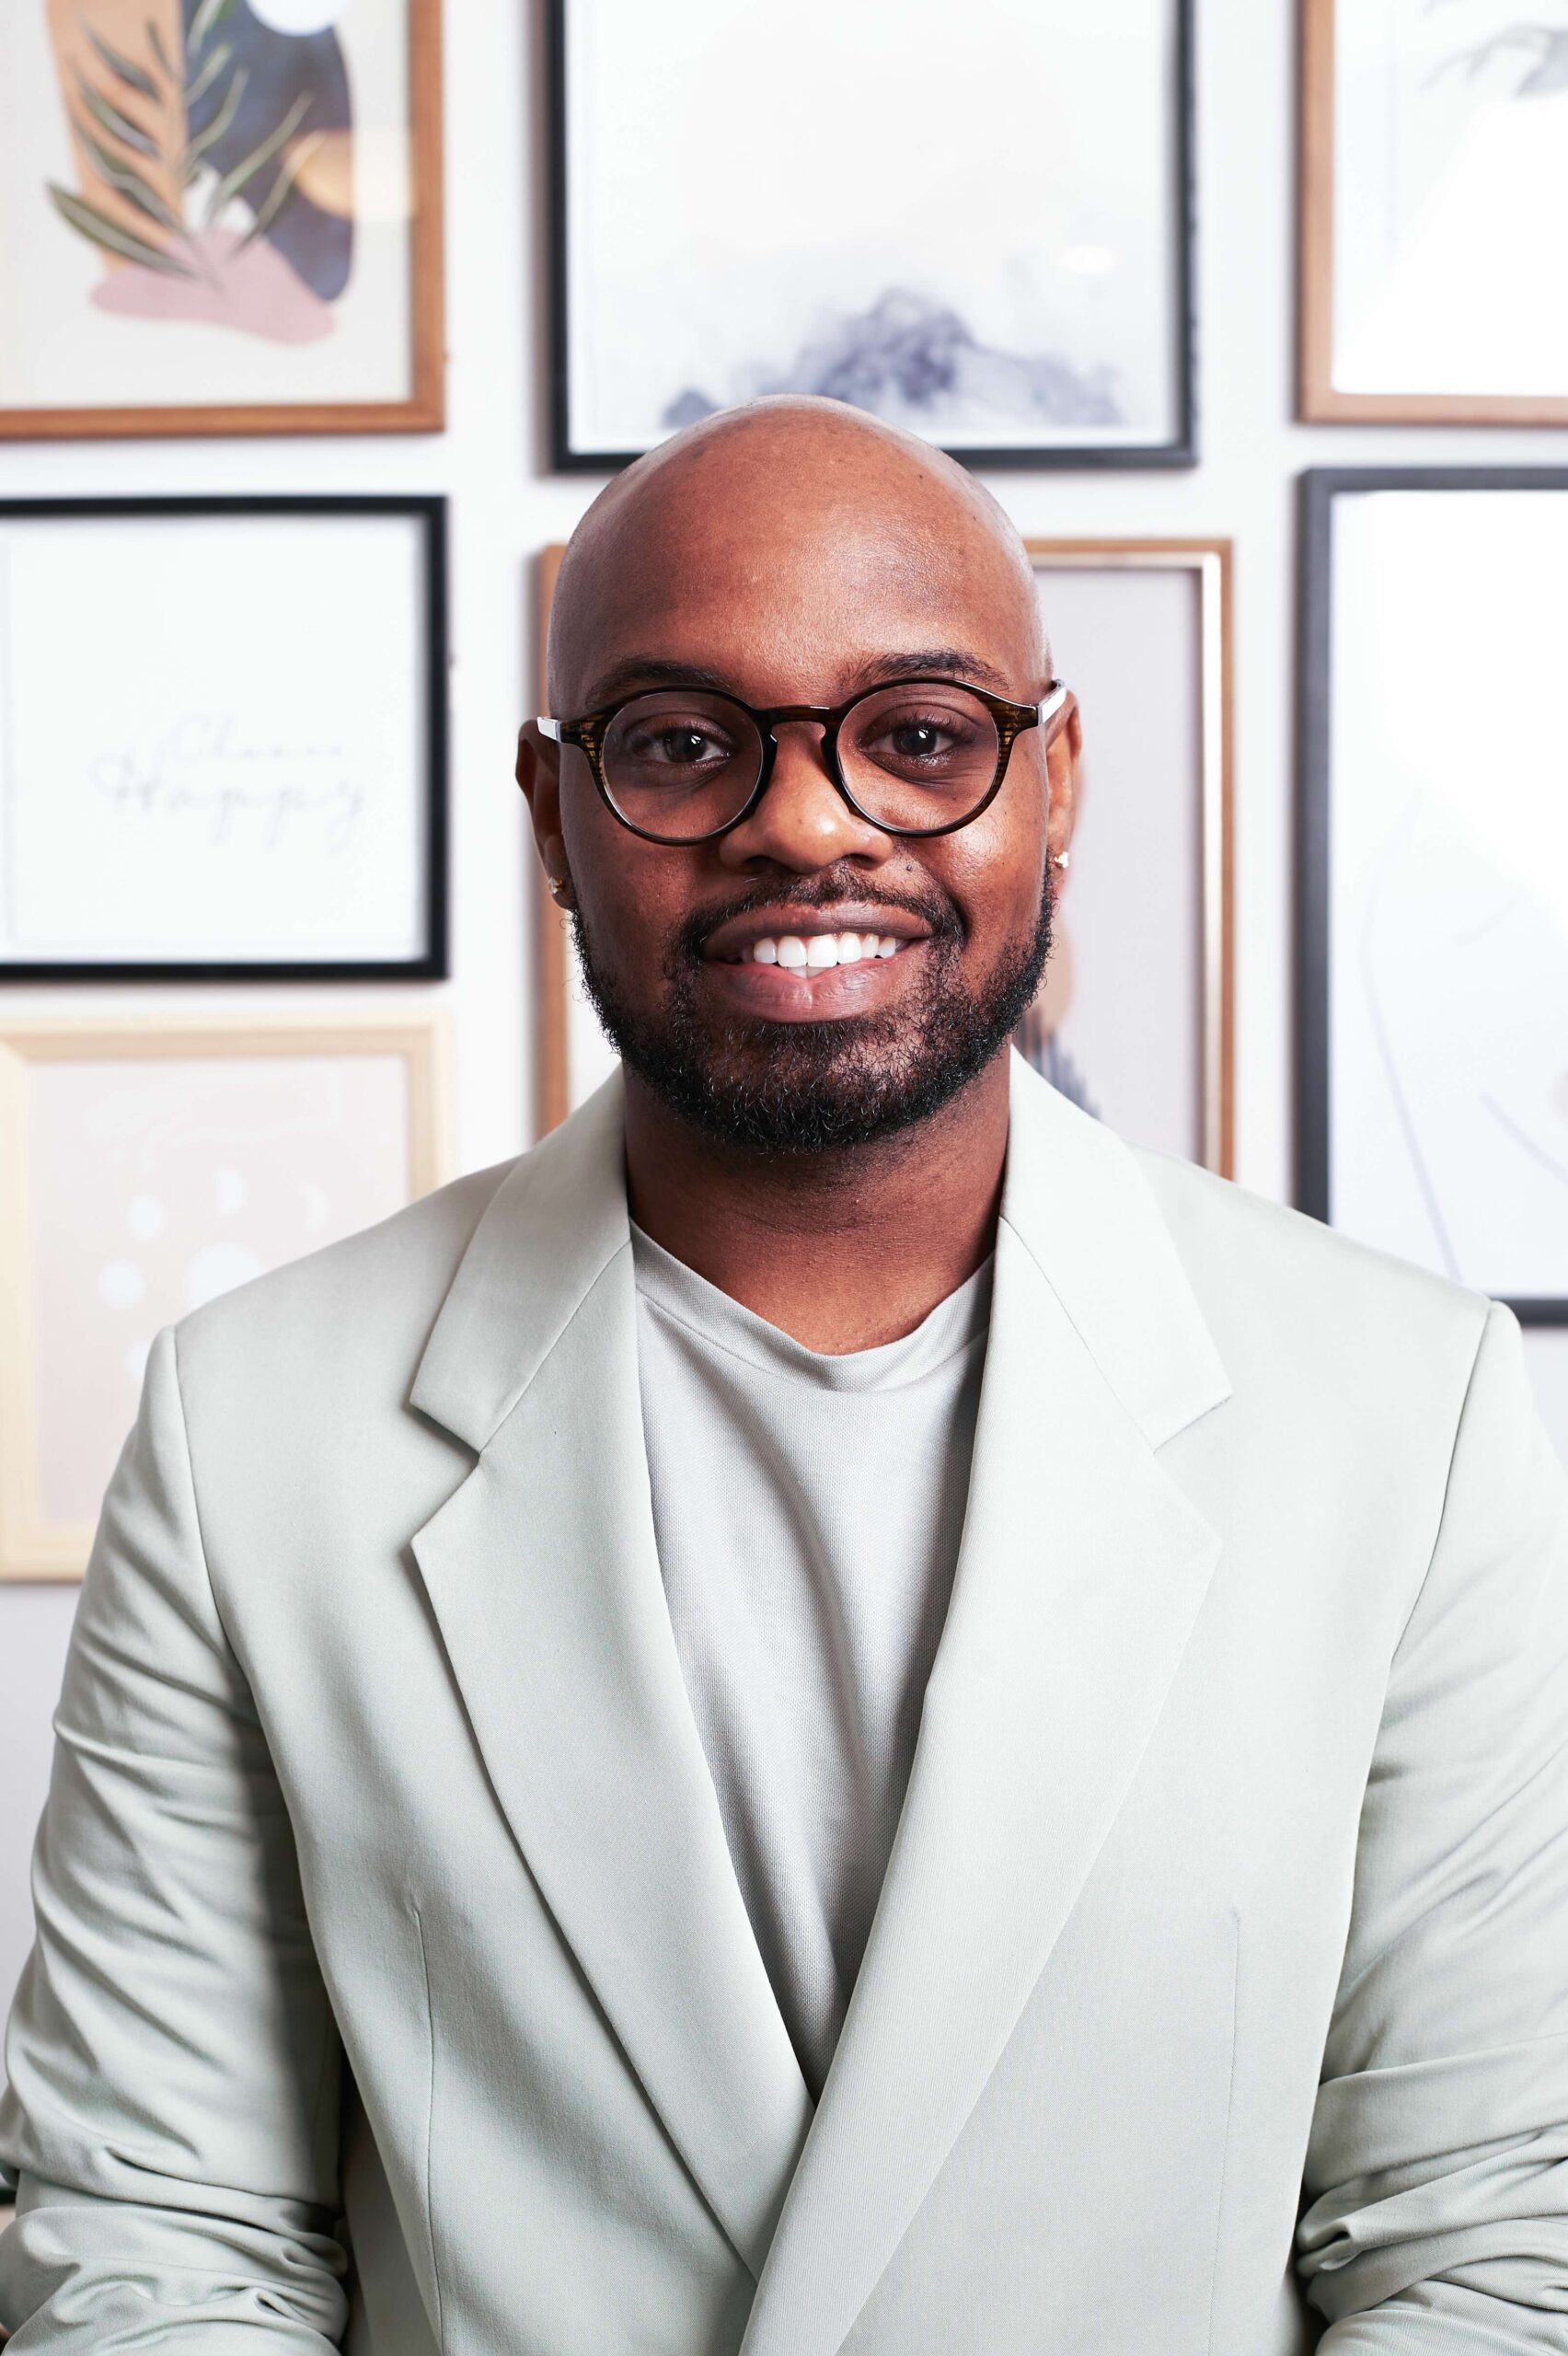 Dewayne Johnson (he/they), a Black person with a bald head and neatly trimmed beard, smiles directly at the camera. He is wearing a light grey suit and shirt that are stylish and monochrome, and black round glasses. Behind them is a gallery wall with posters and art.